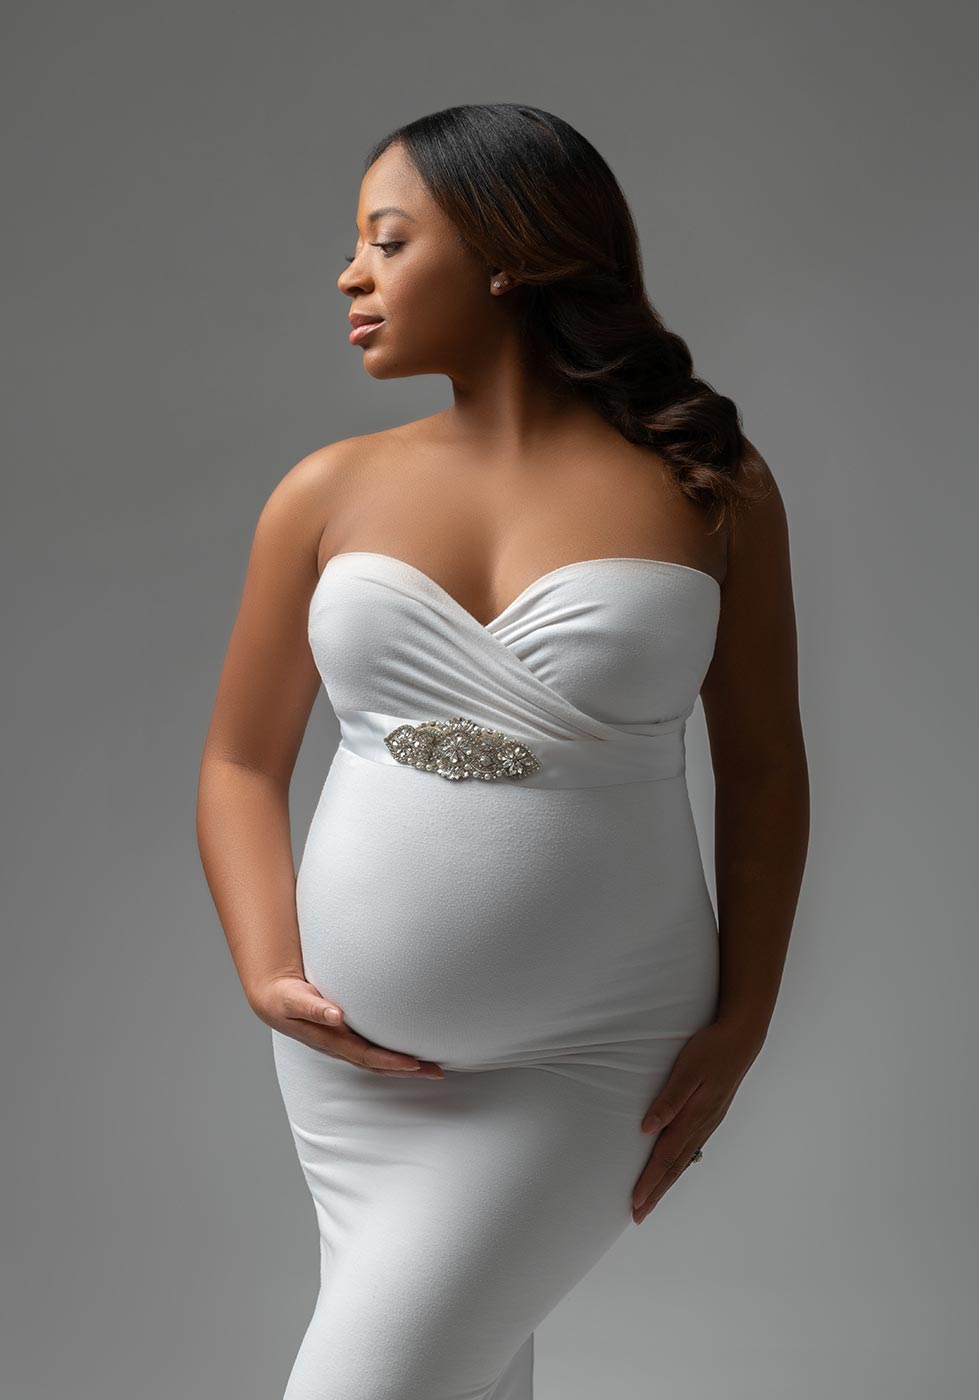 beautiful white dress worn by a pregnant woman in NYC studio